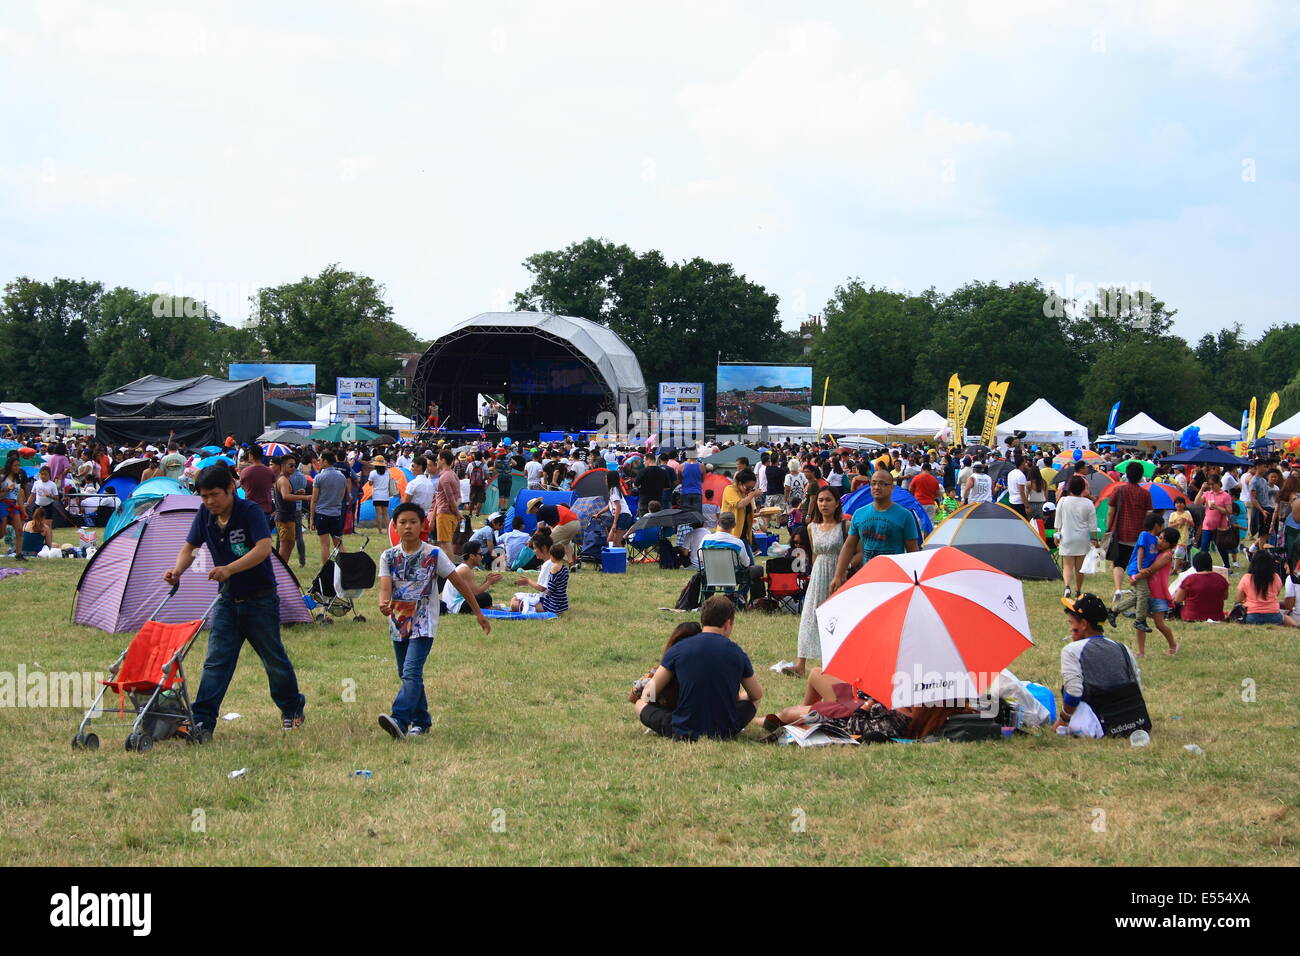 Walton, Surrey, UK. 20th July, 2014. Filipino's start gathering for the fiesta stage events to celebrate family day, all pitching tents and umbrellas for the day's event that will last for more than 12 hours. Credit:  Paul Hamilton/Alamy Live News Stock Photo